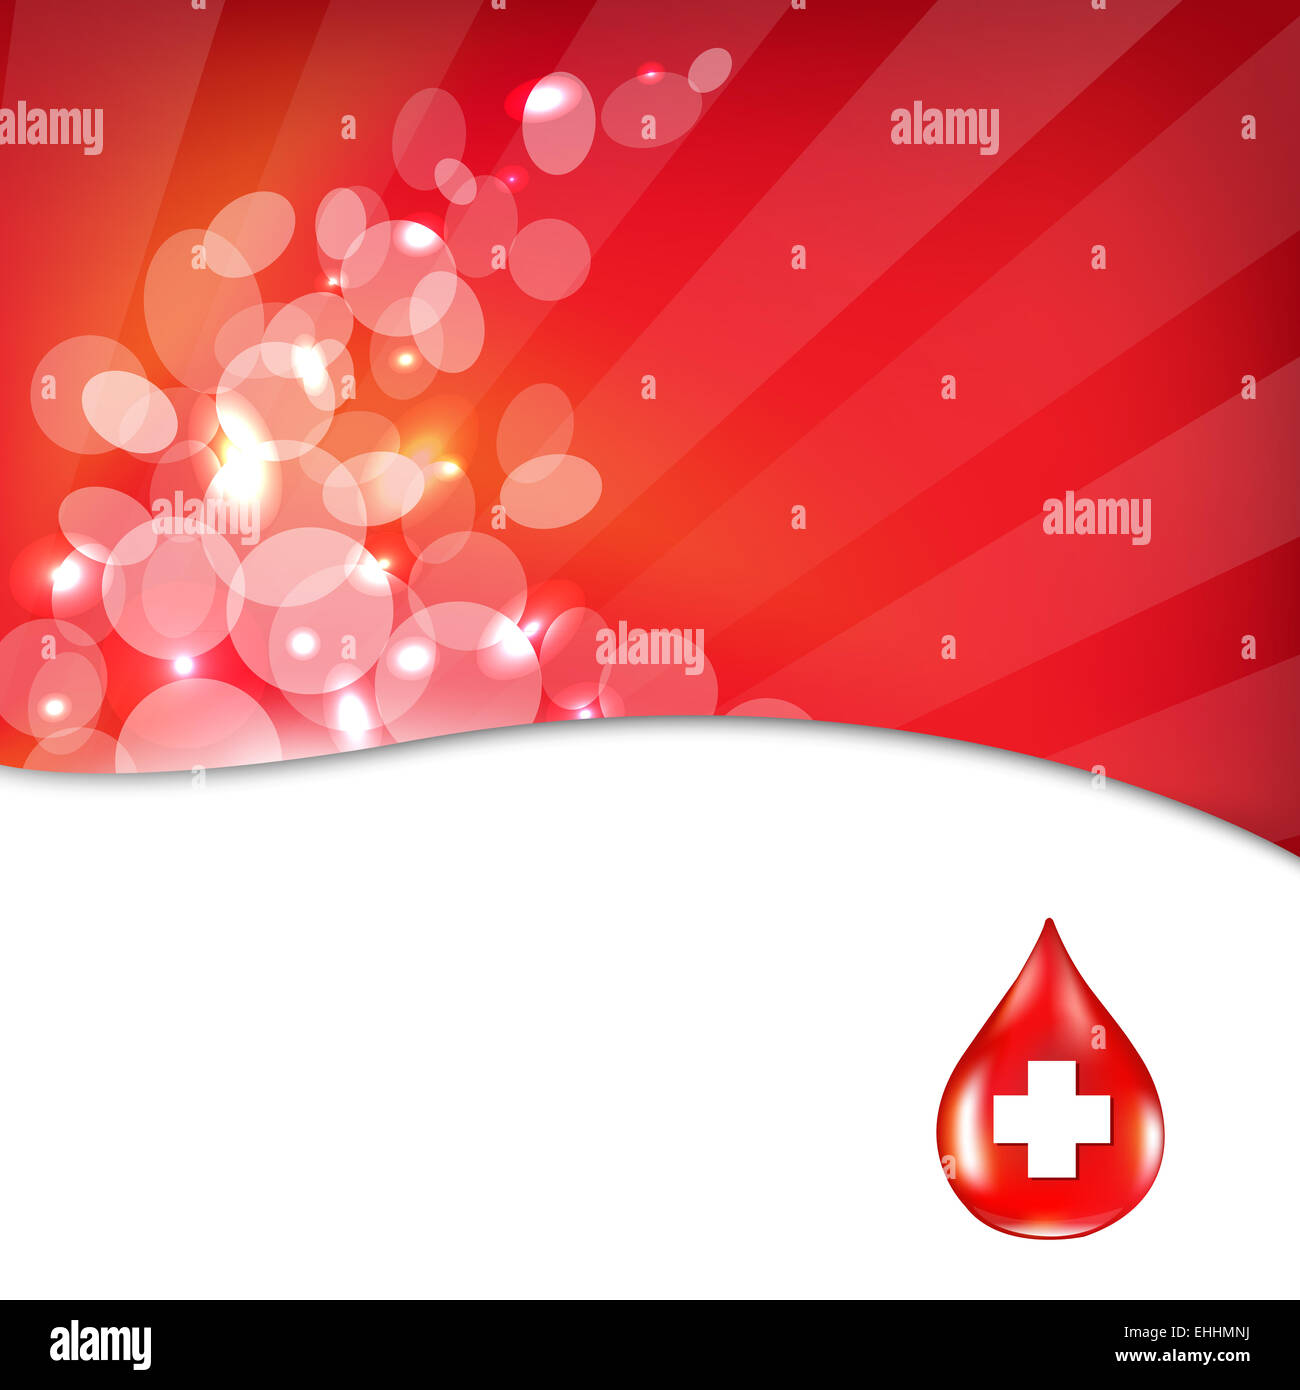 Red Background With Red Drop Blood Stock Photo